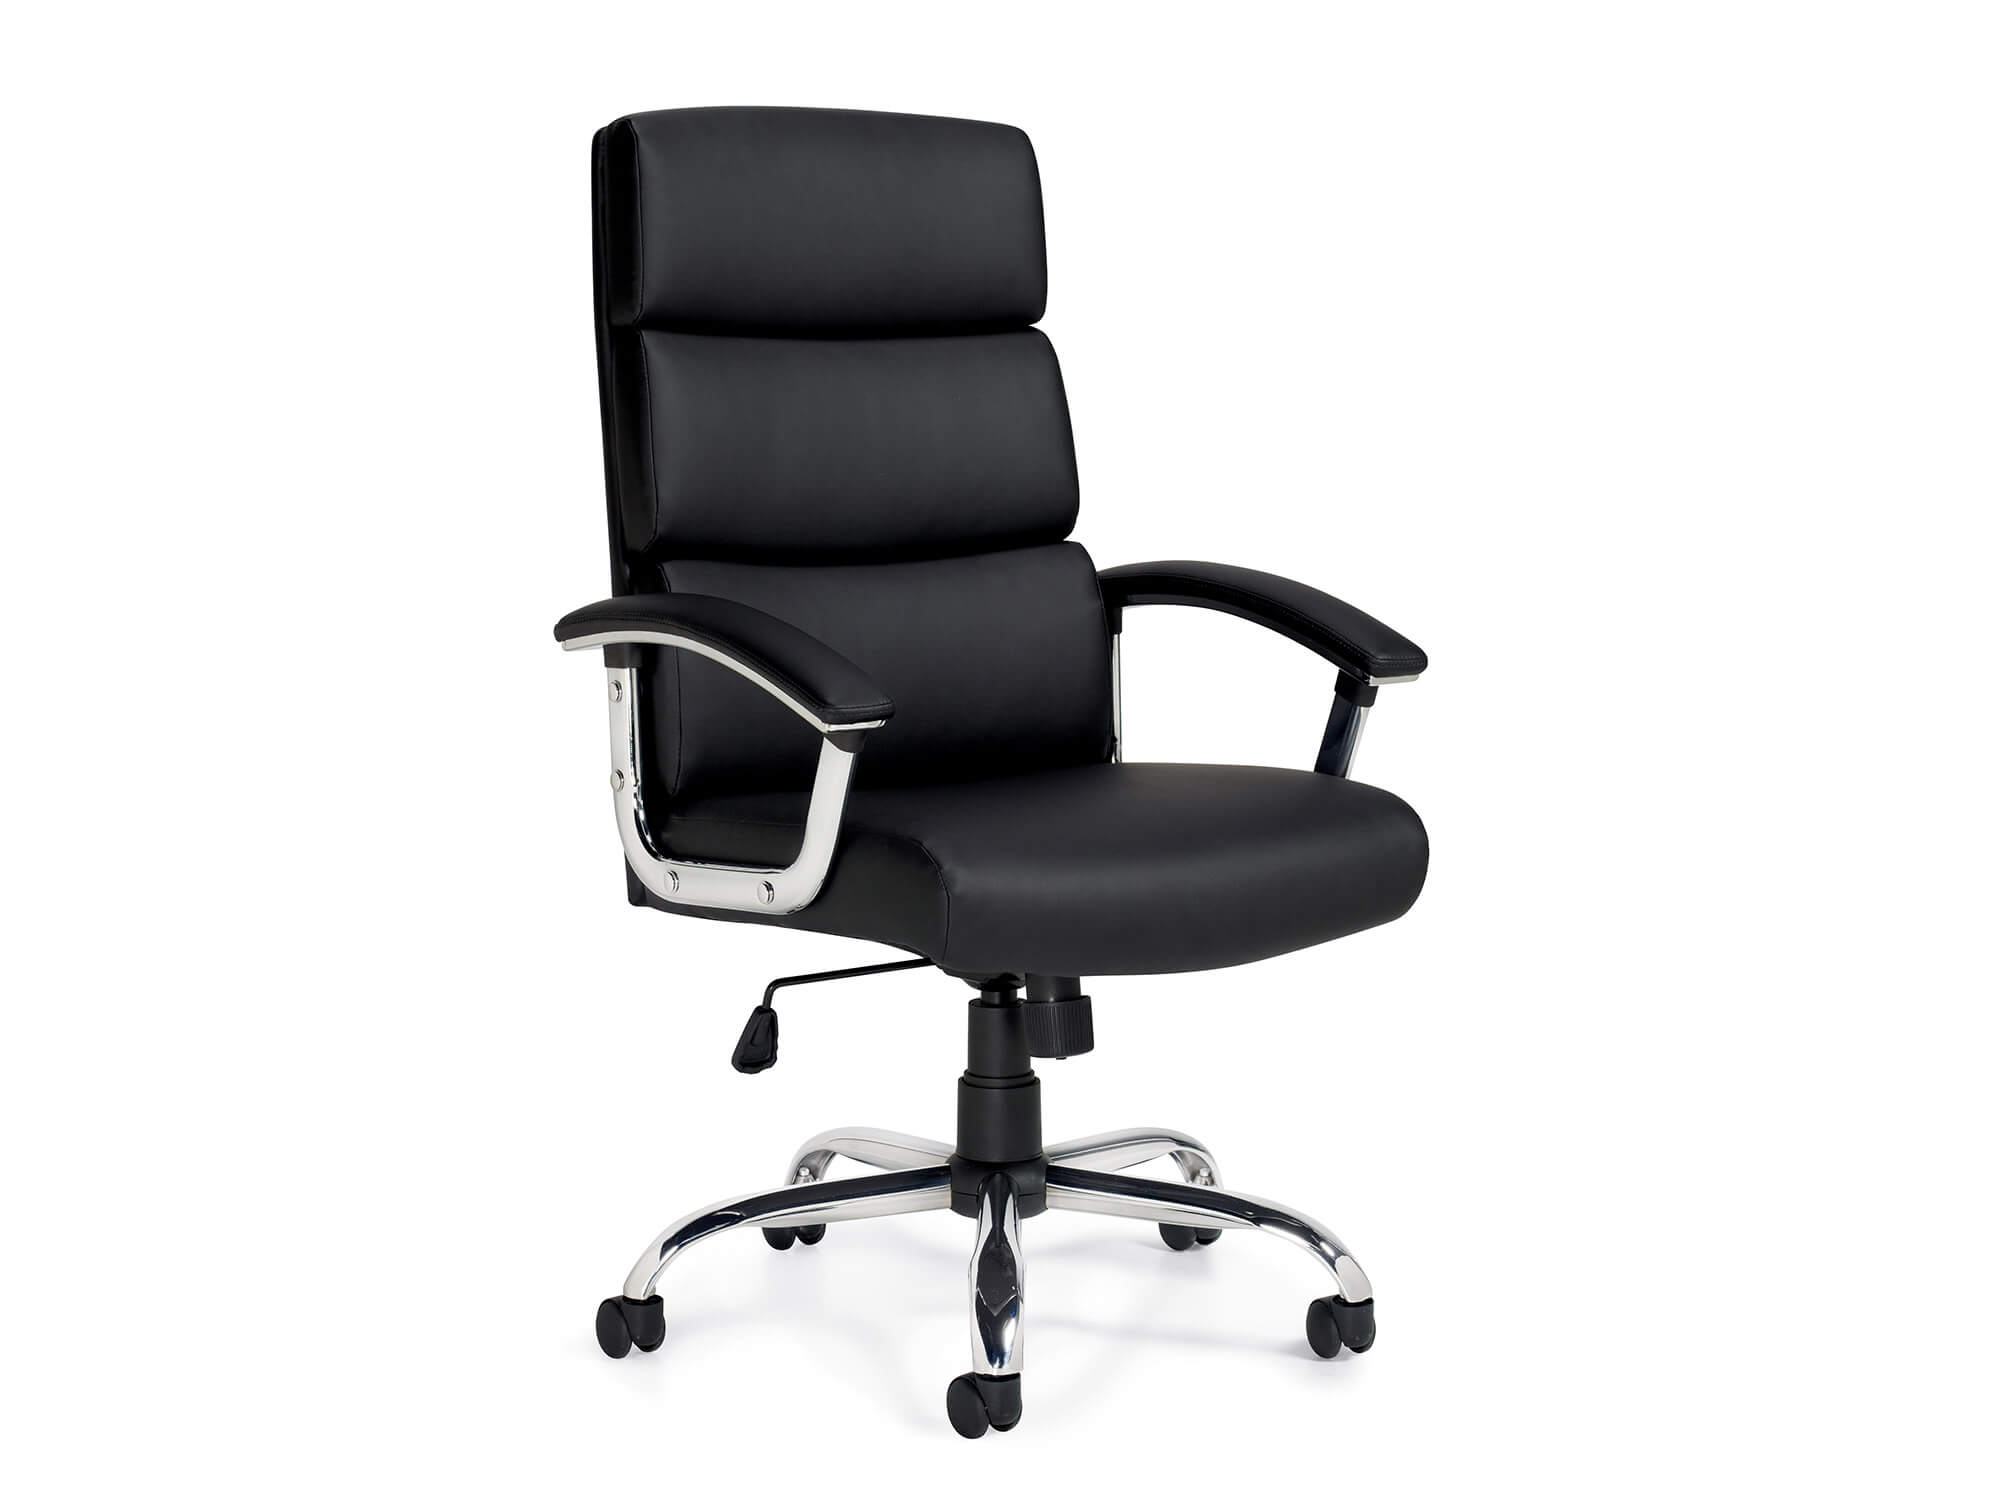 chairs-for-office-stylish-office-chairs.jpg